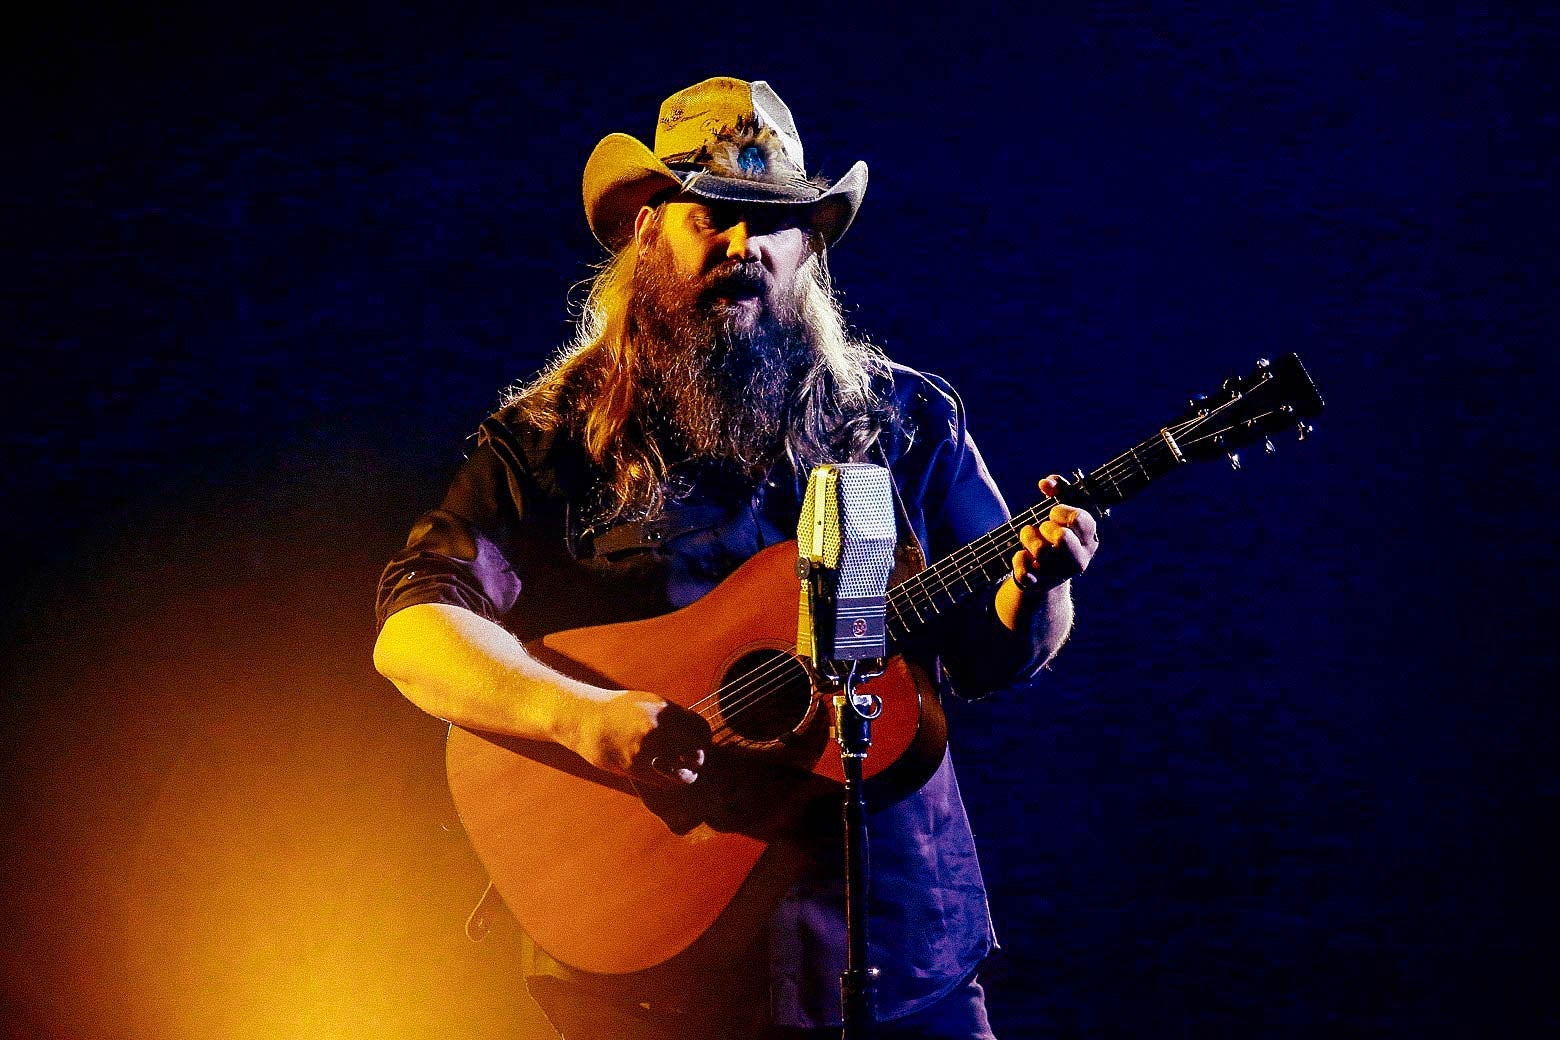 Chris Stapleton’s Starting Over, reviewed New album finds the country